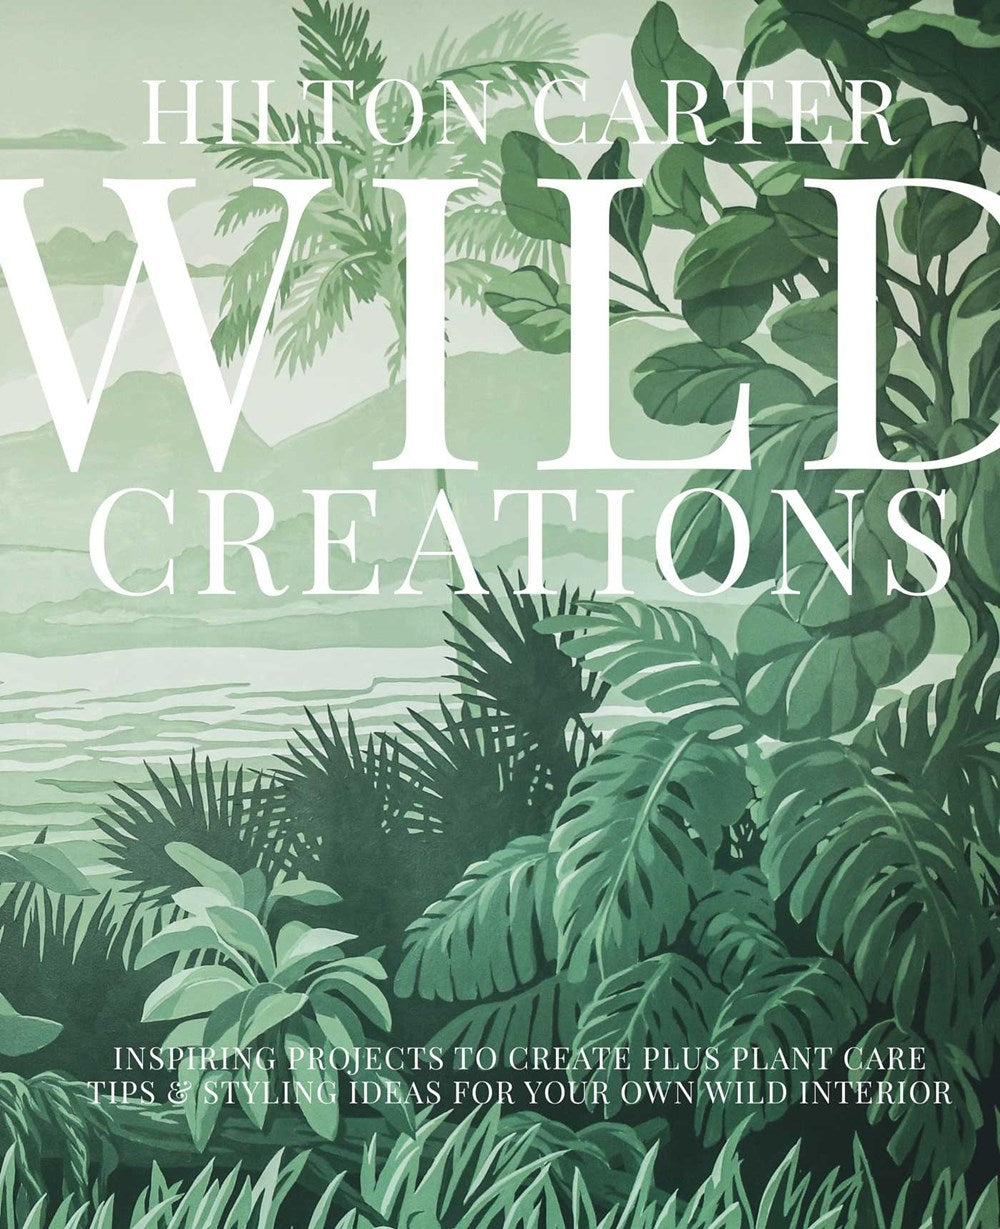 Wild Creations: Inspiring Projects to Create plus Plant Care Tips & Styling Ideas for Your Own Wild Interior illustrated by Hilton Carter